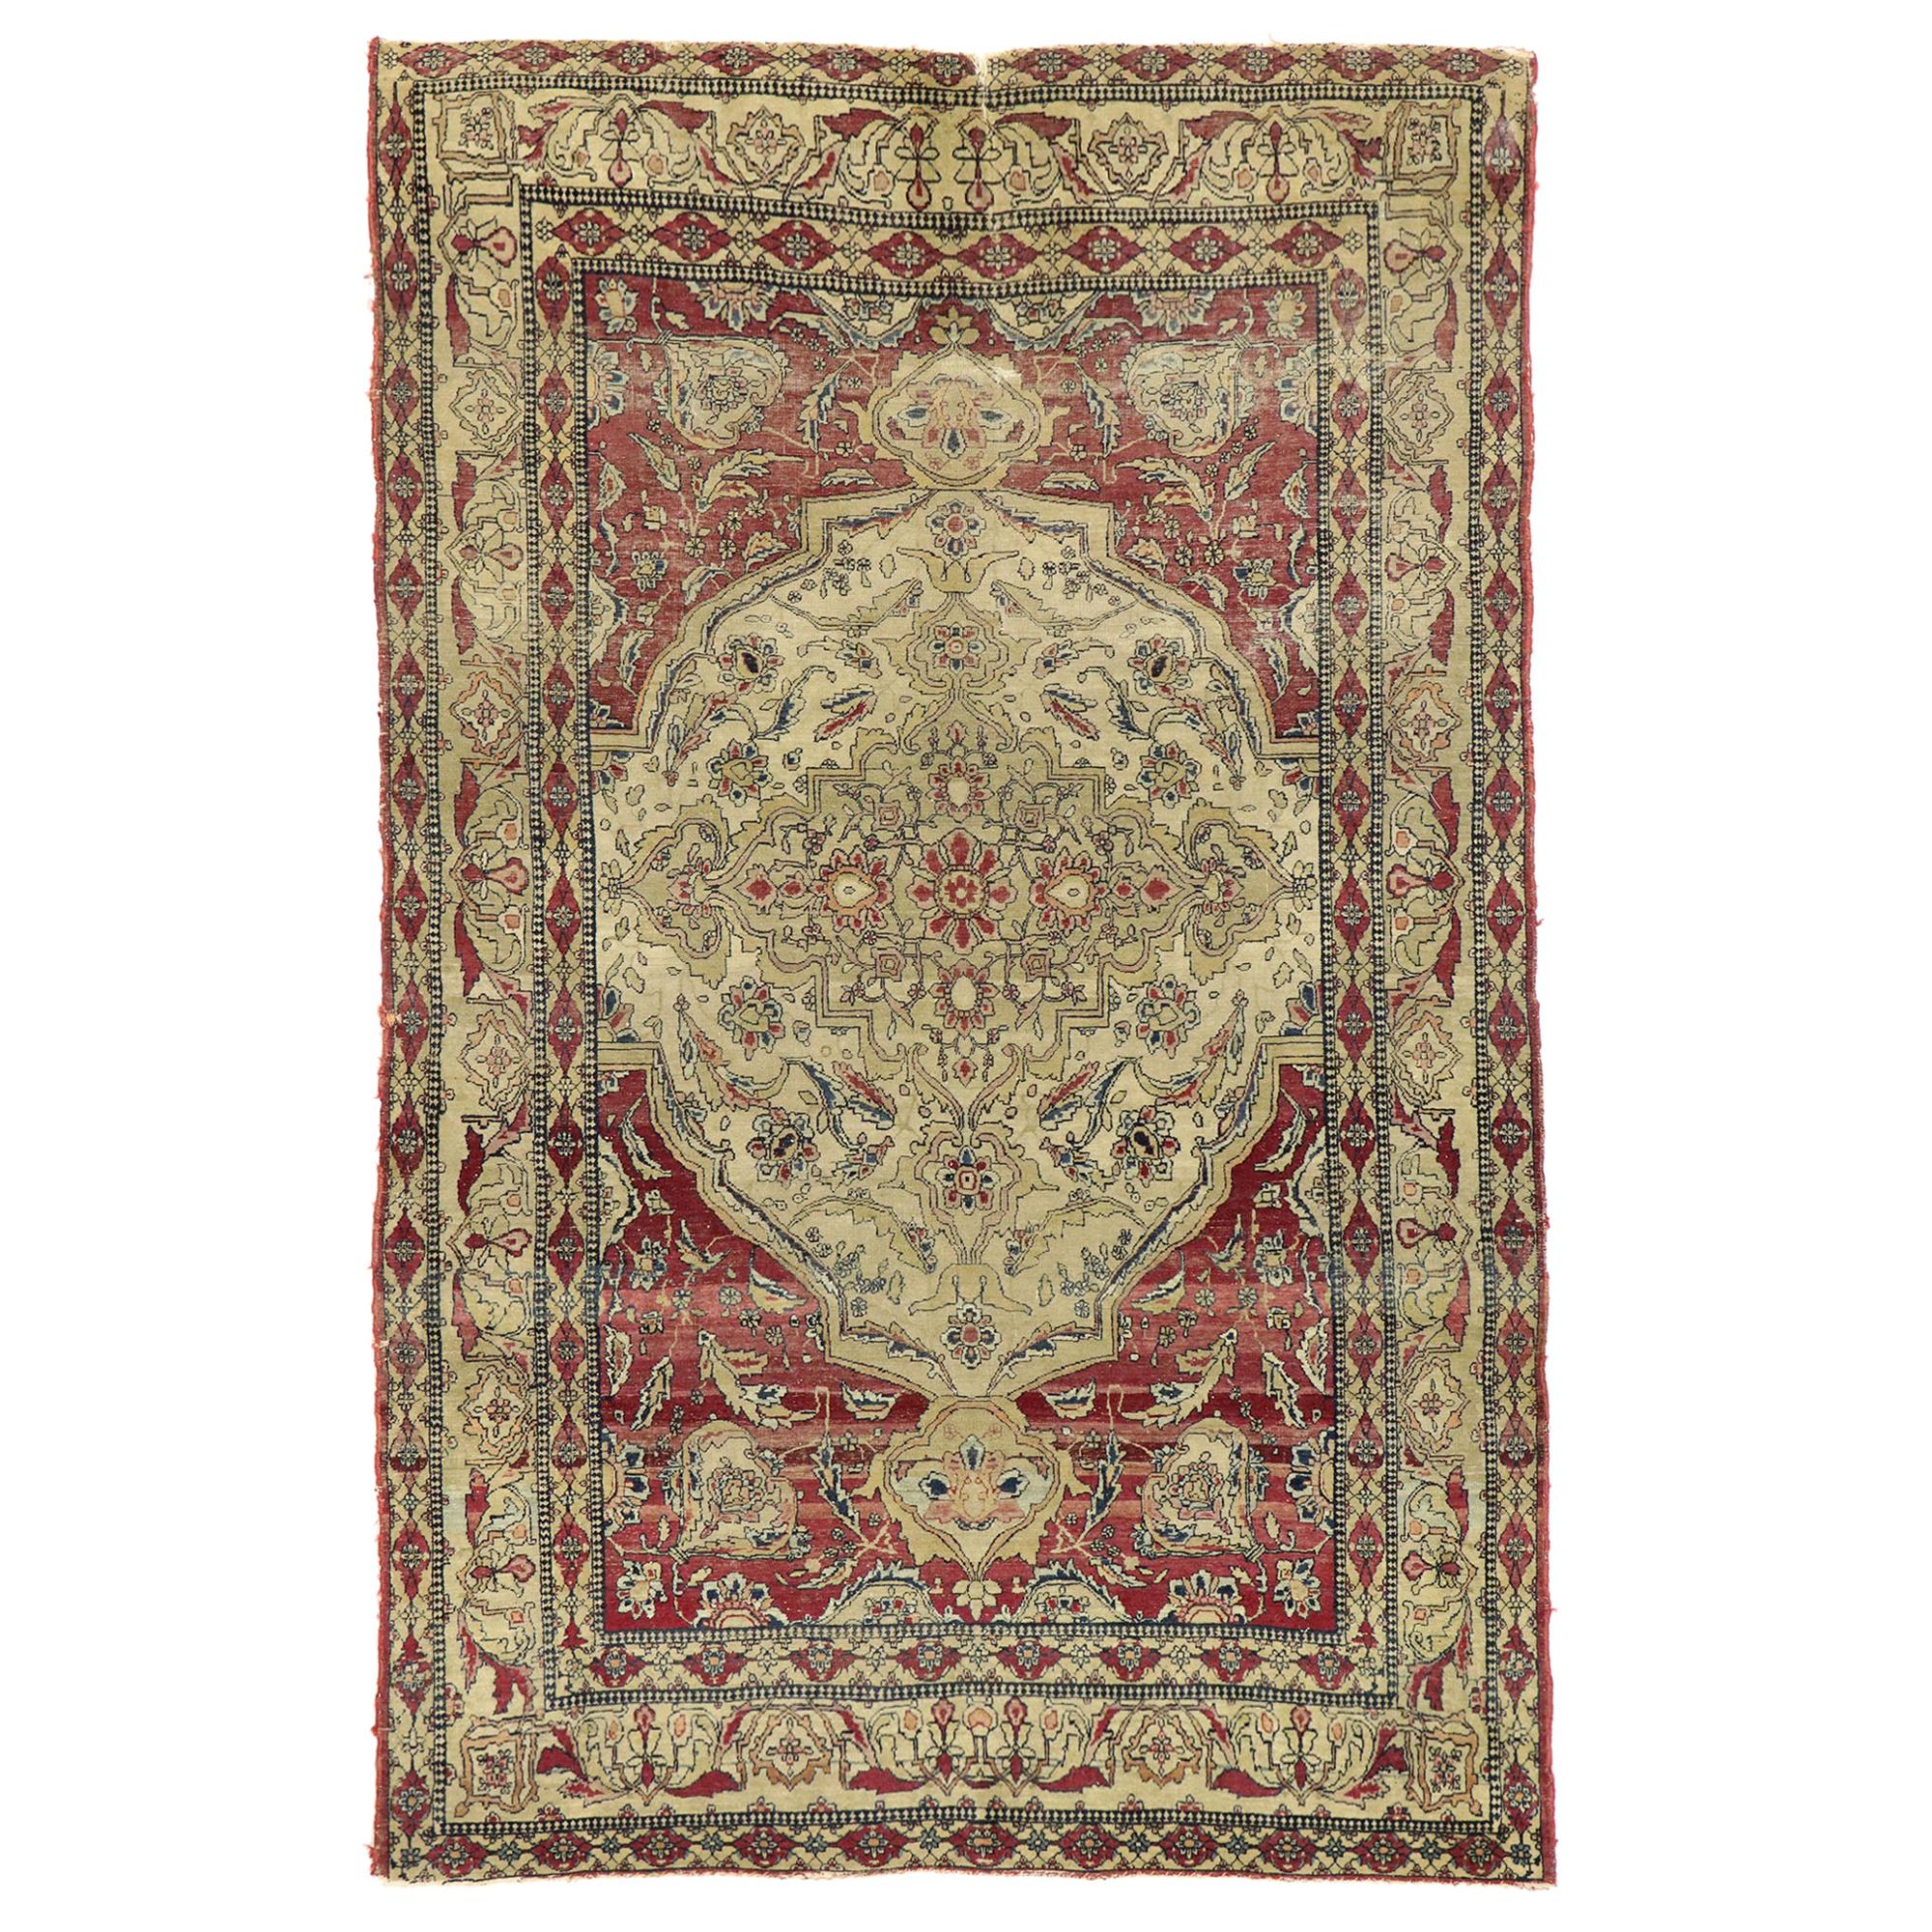 Distressed Antique Persian Kerman Rug with Modern Rustic English Style